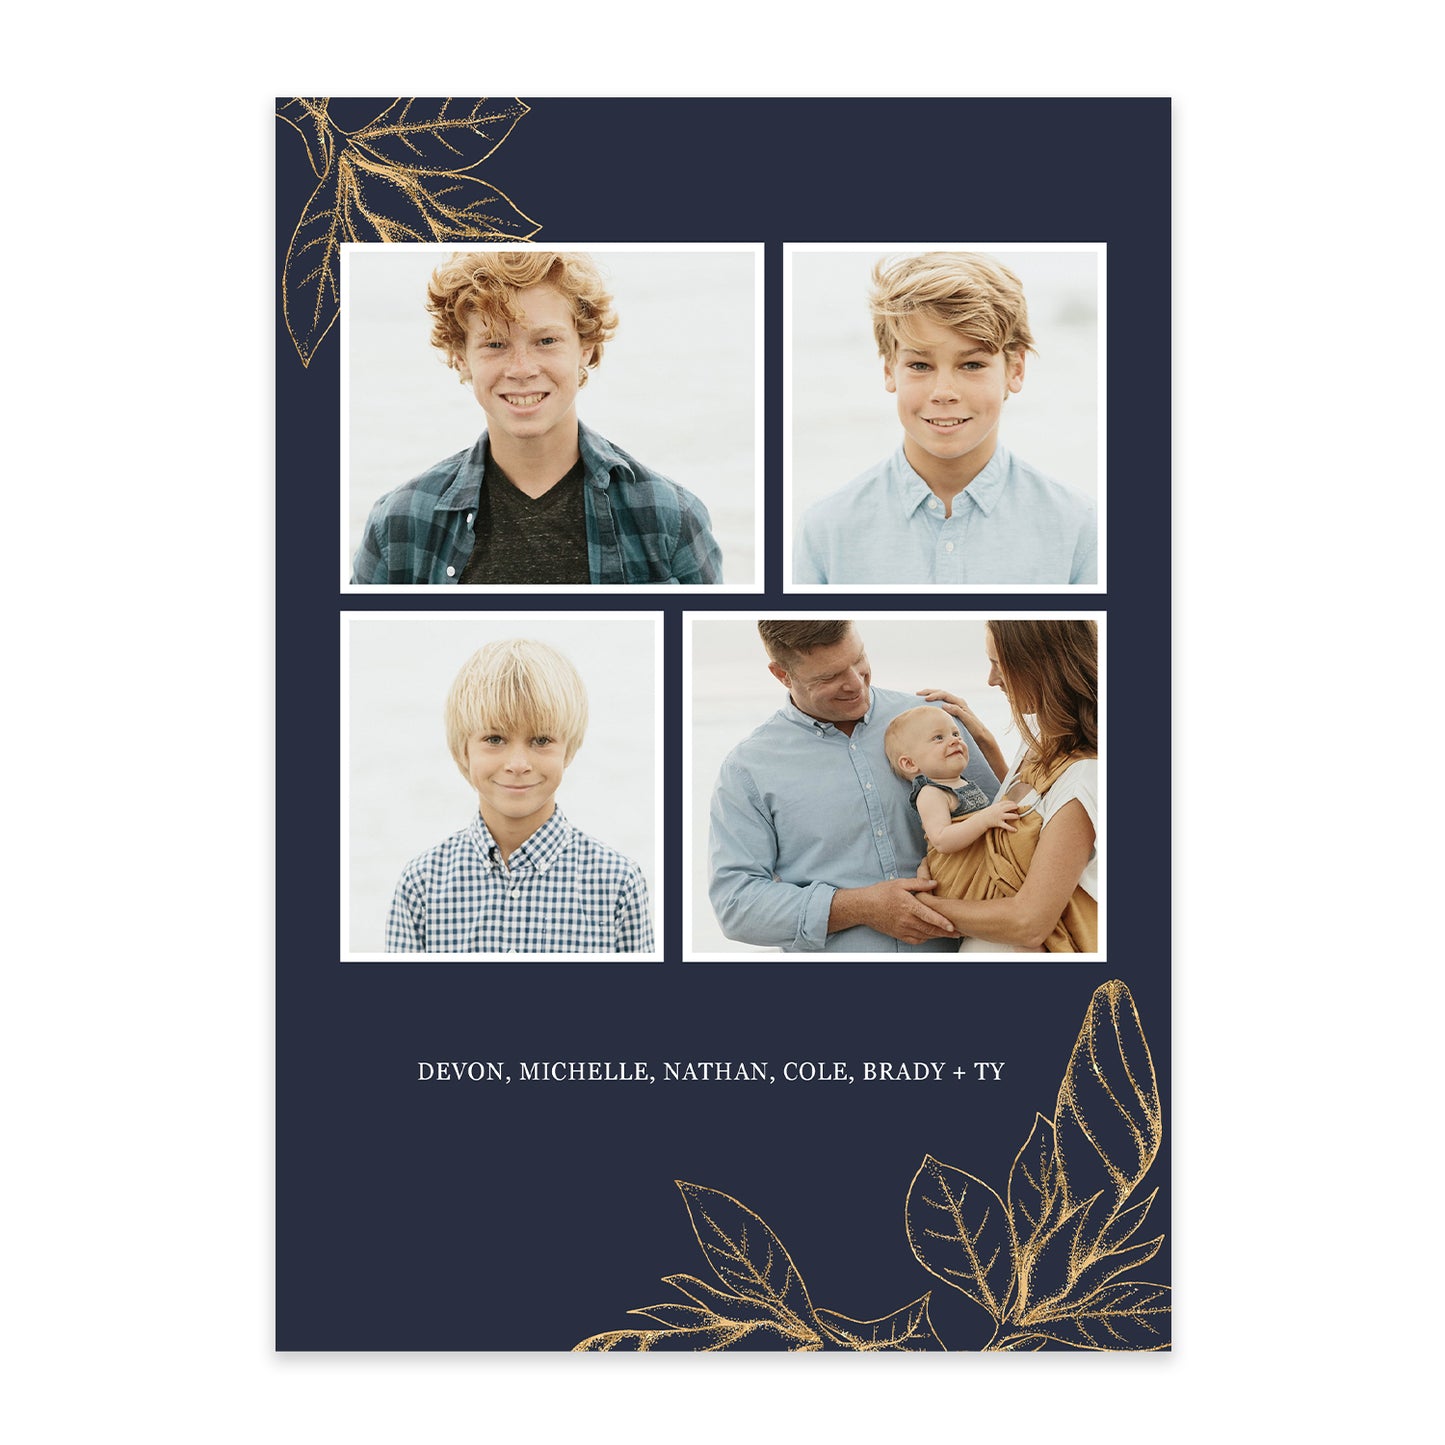 Navy and Gold Leaf Christmas Card